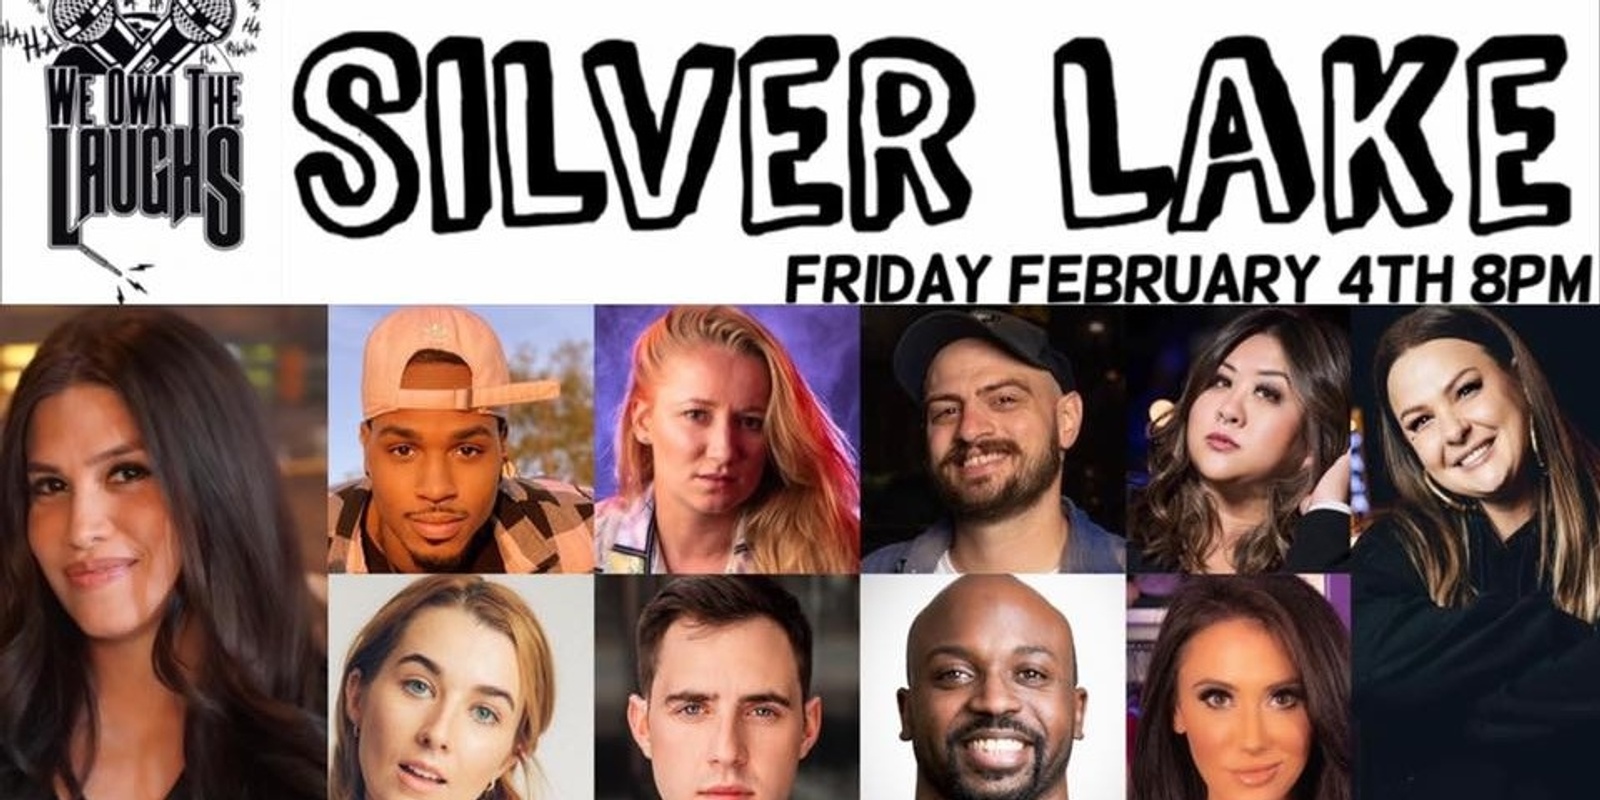 Banner image for We Own The Laughs: Silver Lake